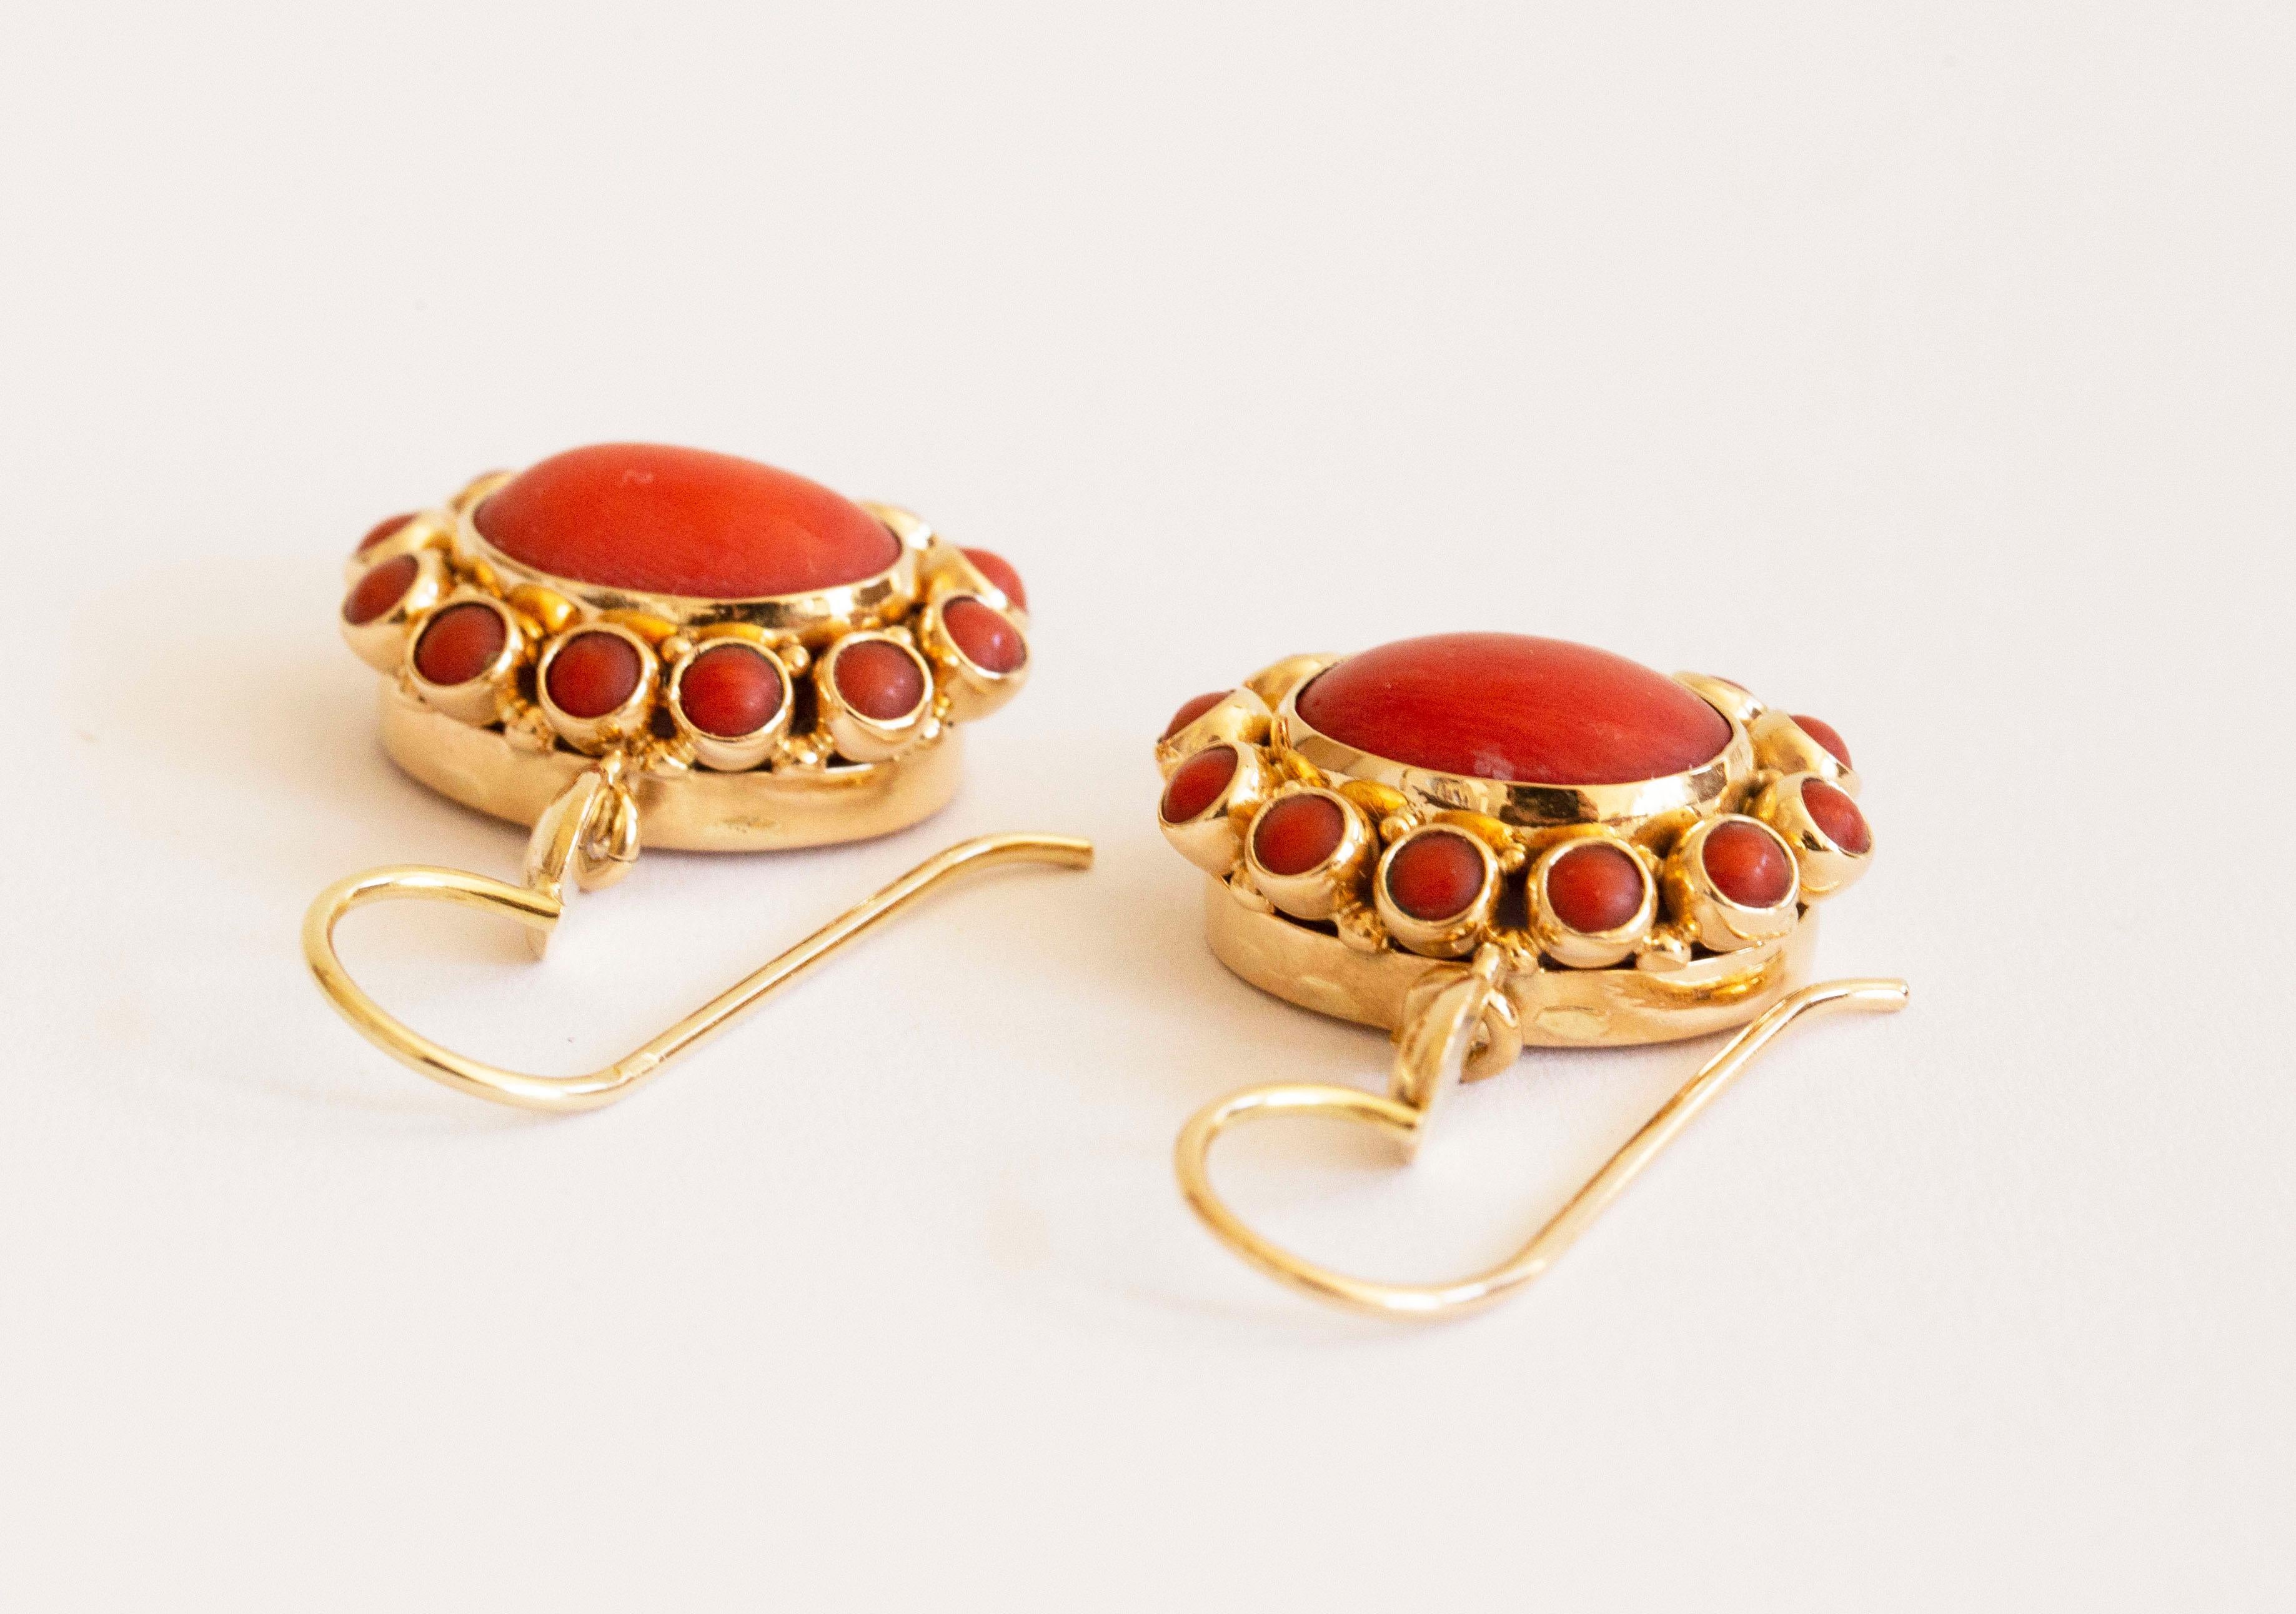 Cabochon Red Coral and 14 Karat Gold Vintage Dutch Pendant Earrings For Sale